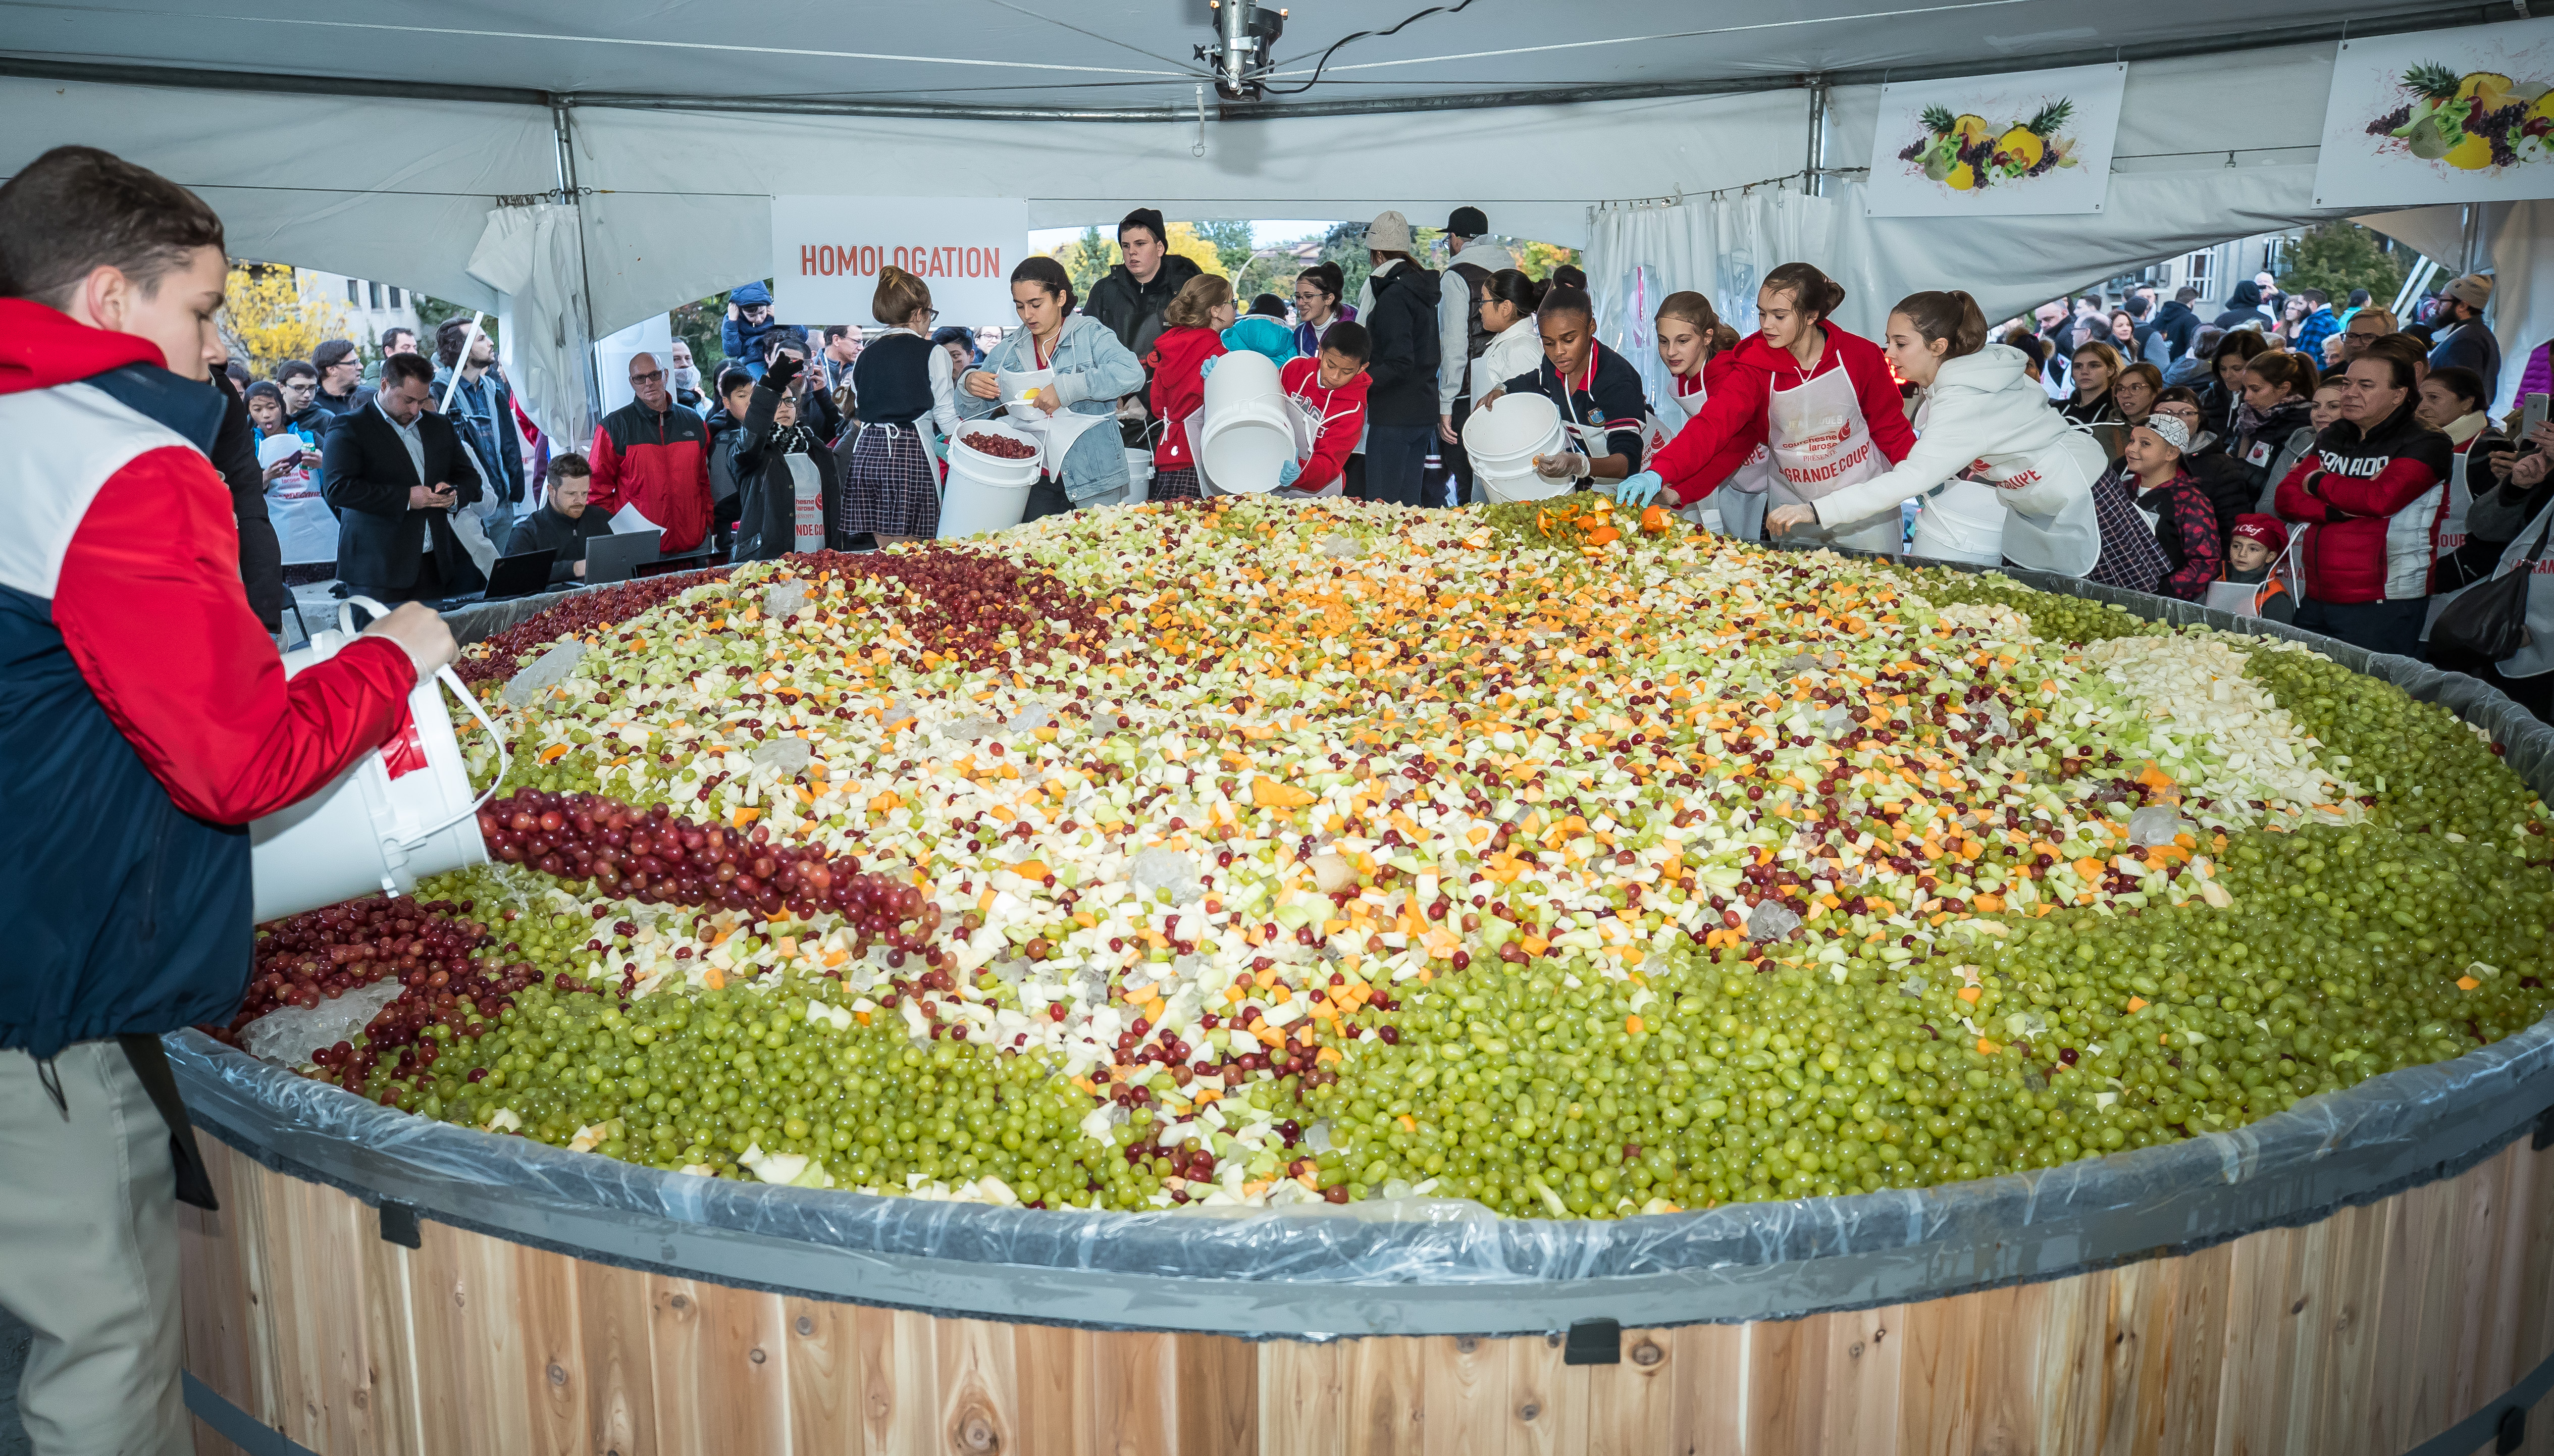 Guiness world record for largest fruit salad